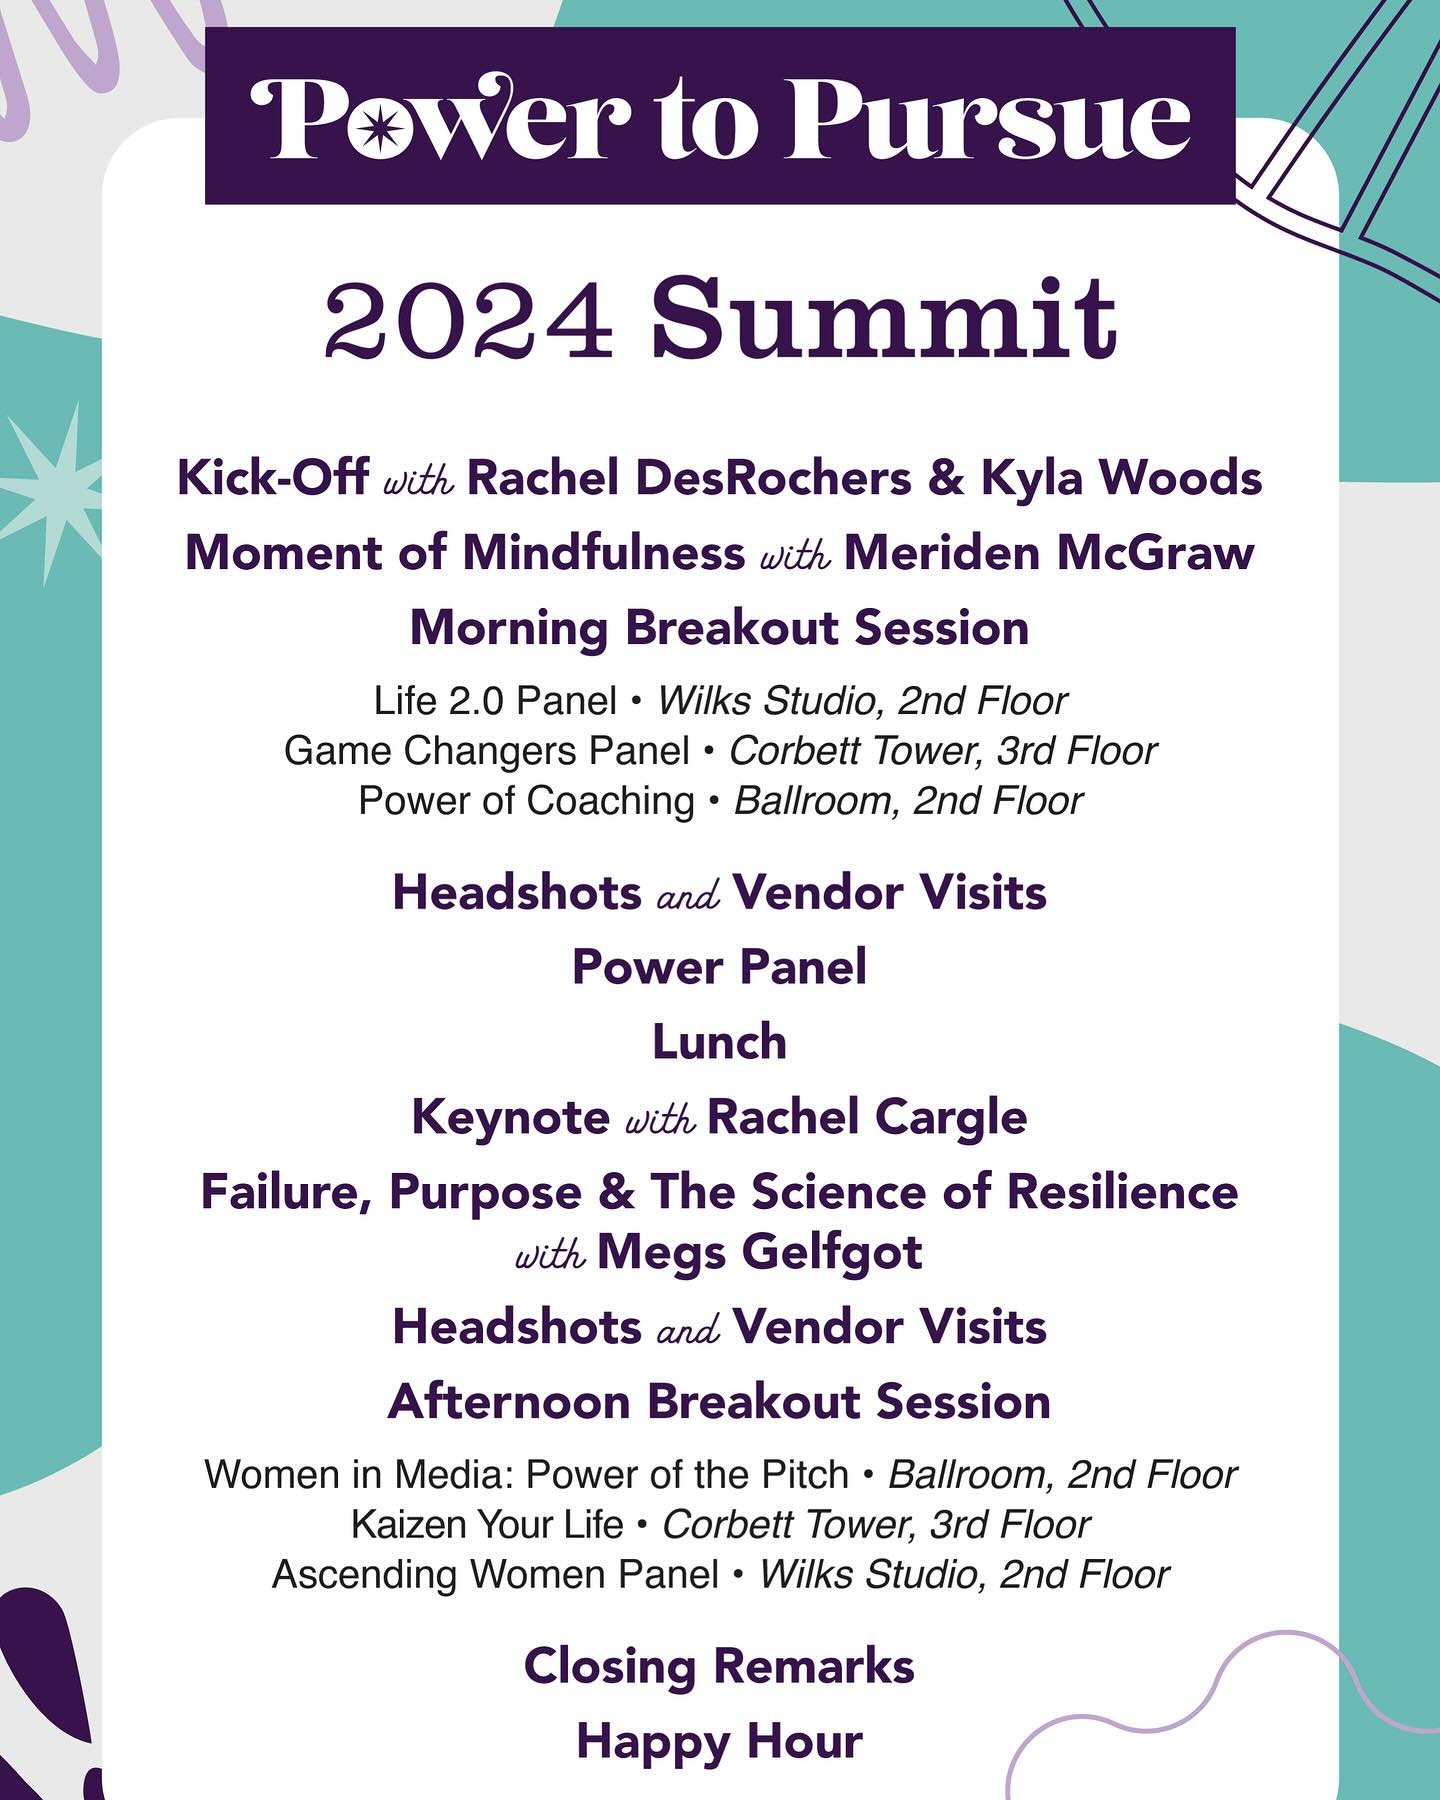 Here&rsquo;s what to expect FRIDAY!

Kick-Off with Rachel DesRochers &amp; Kyla Woods
Moment of Mindfulness with Meriden McGraw

Morning Breakout Sessions
Life 2.0 Panel &bull; Ballroom, 2nd Floor
Game Changers Panel &bull; Wilks Studio, 2nd Floor�
P